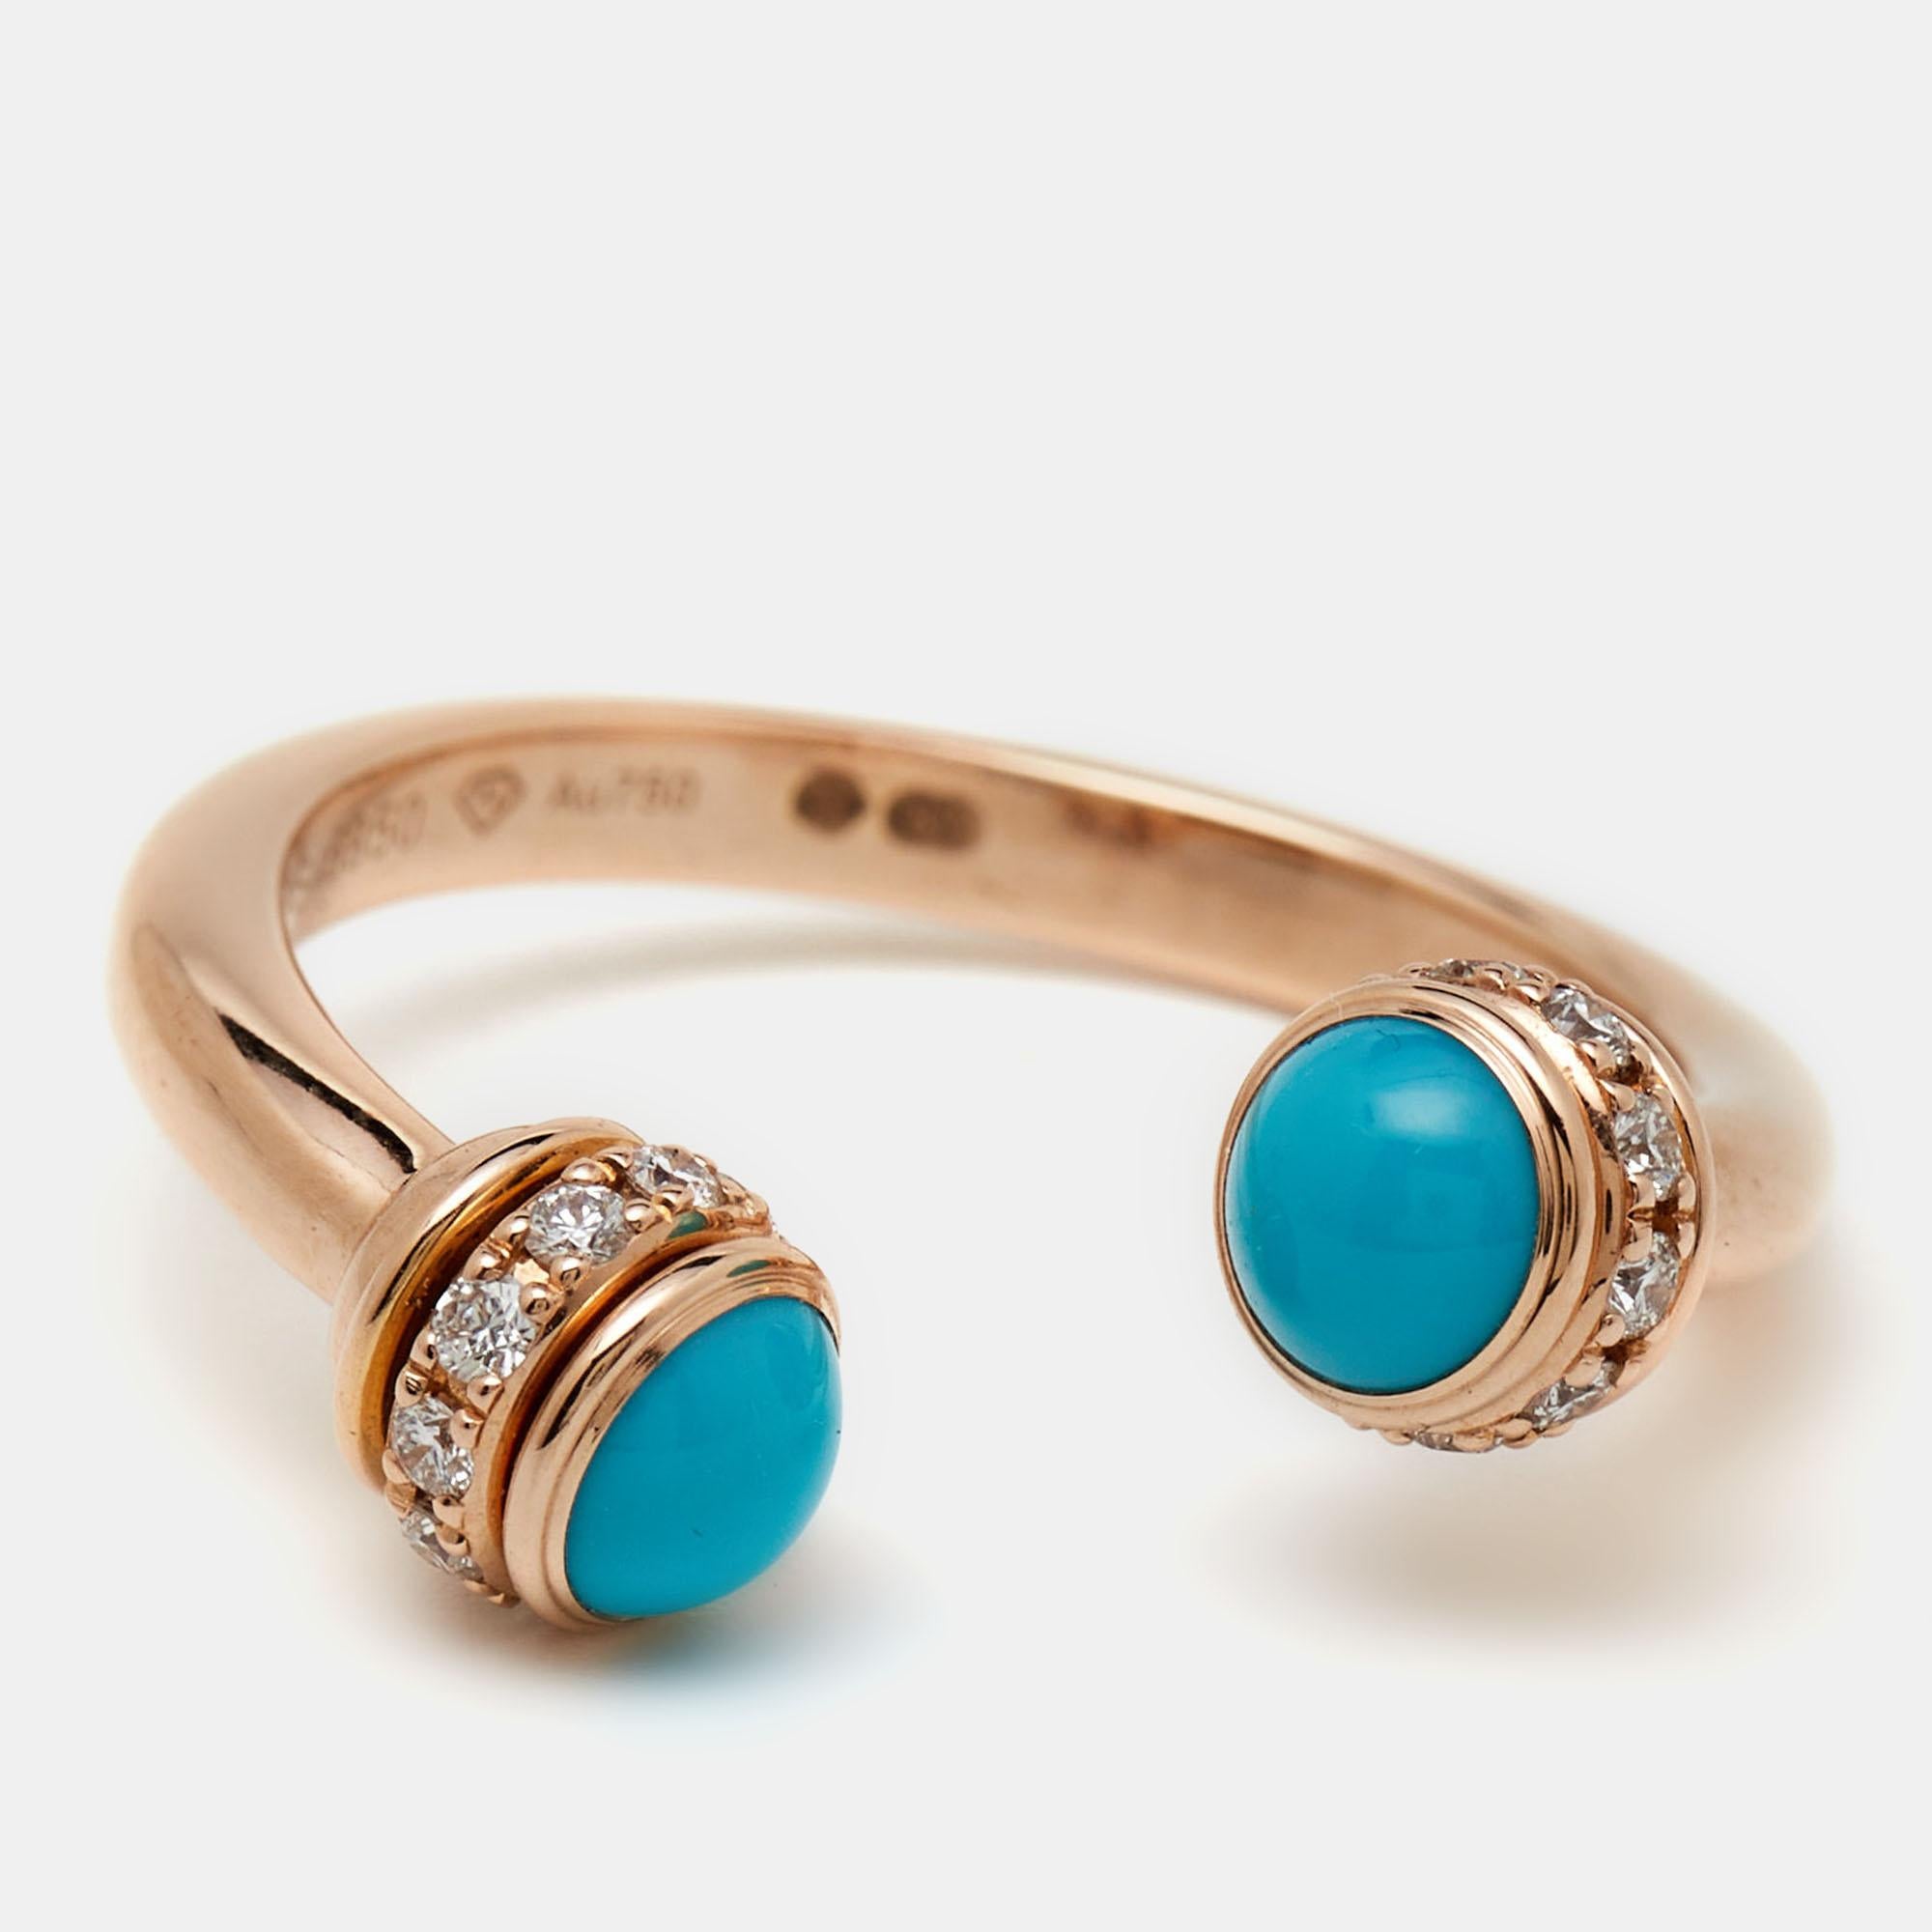 Piaget Possession Turquoise Diamond 18k Rose Gold Ring Size 51 In Excellent Condition For Sale In Dubai, Al Qouz 2